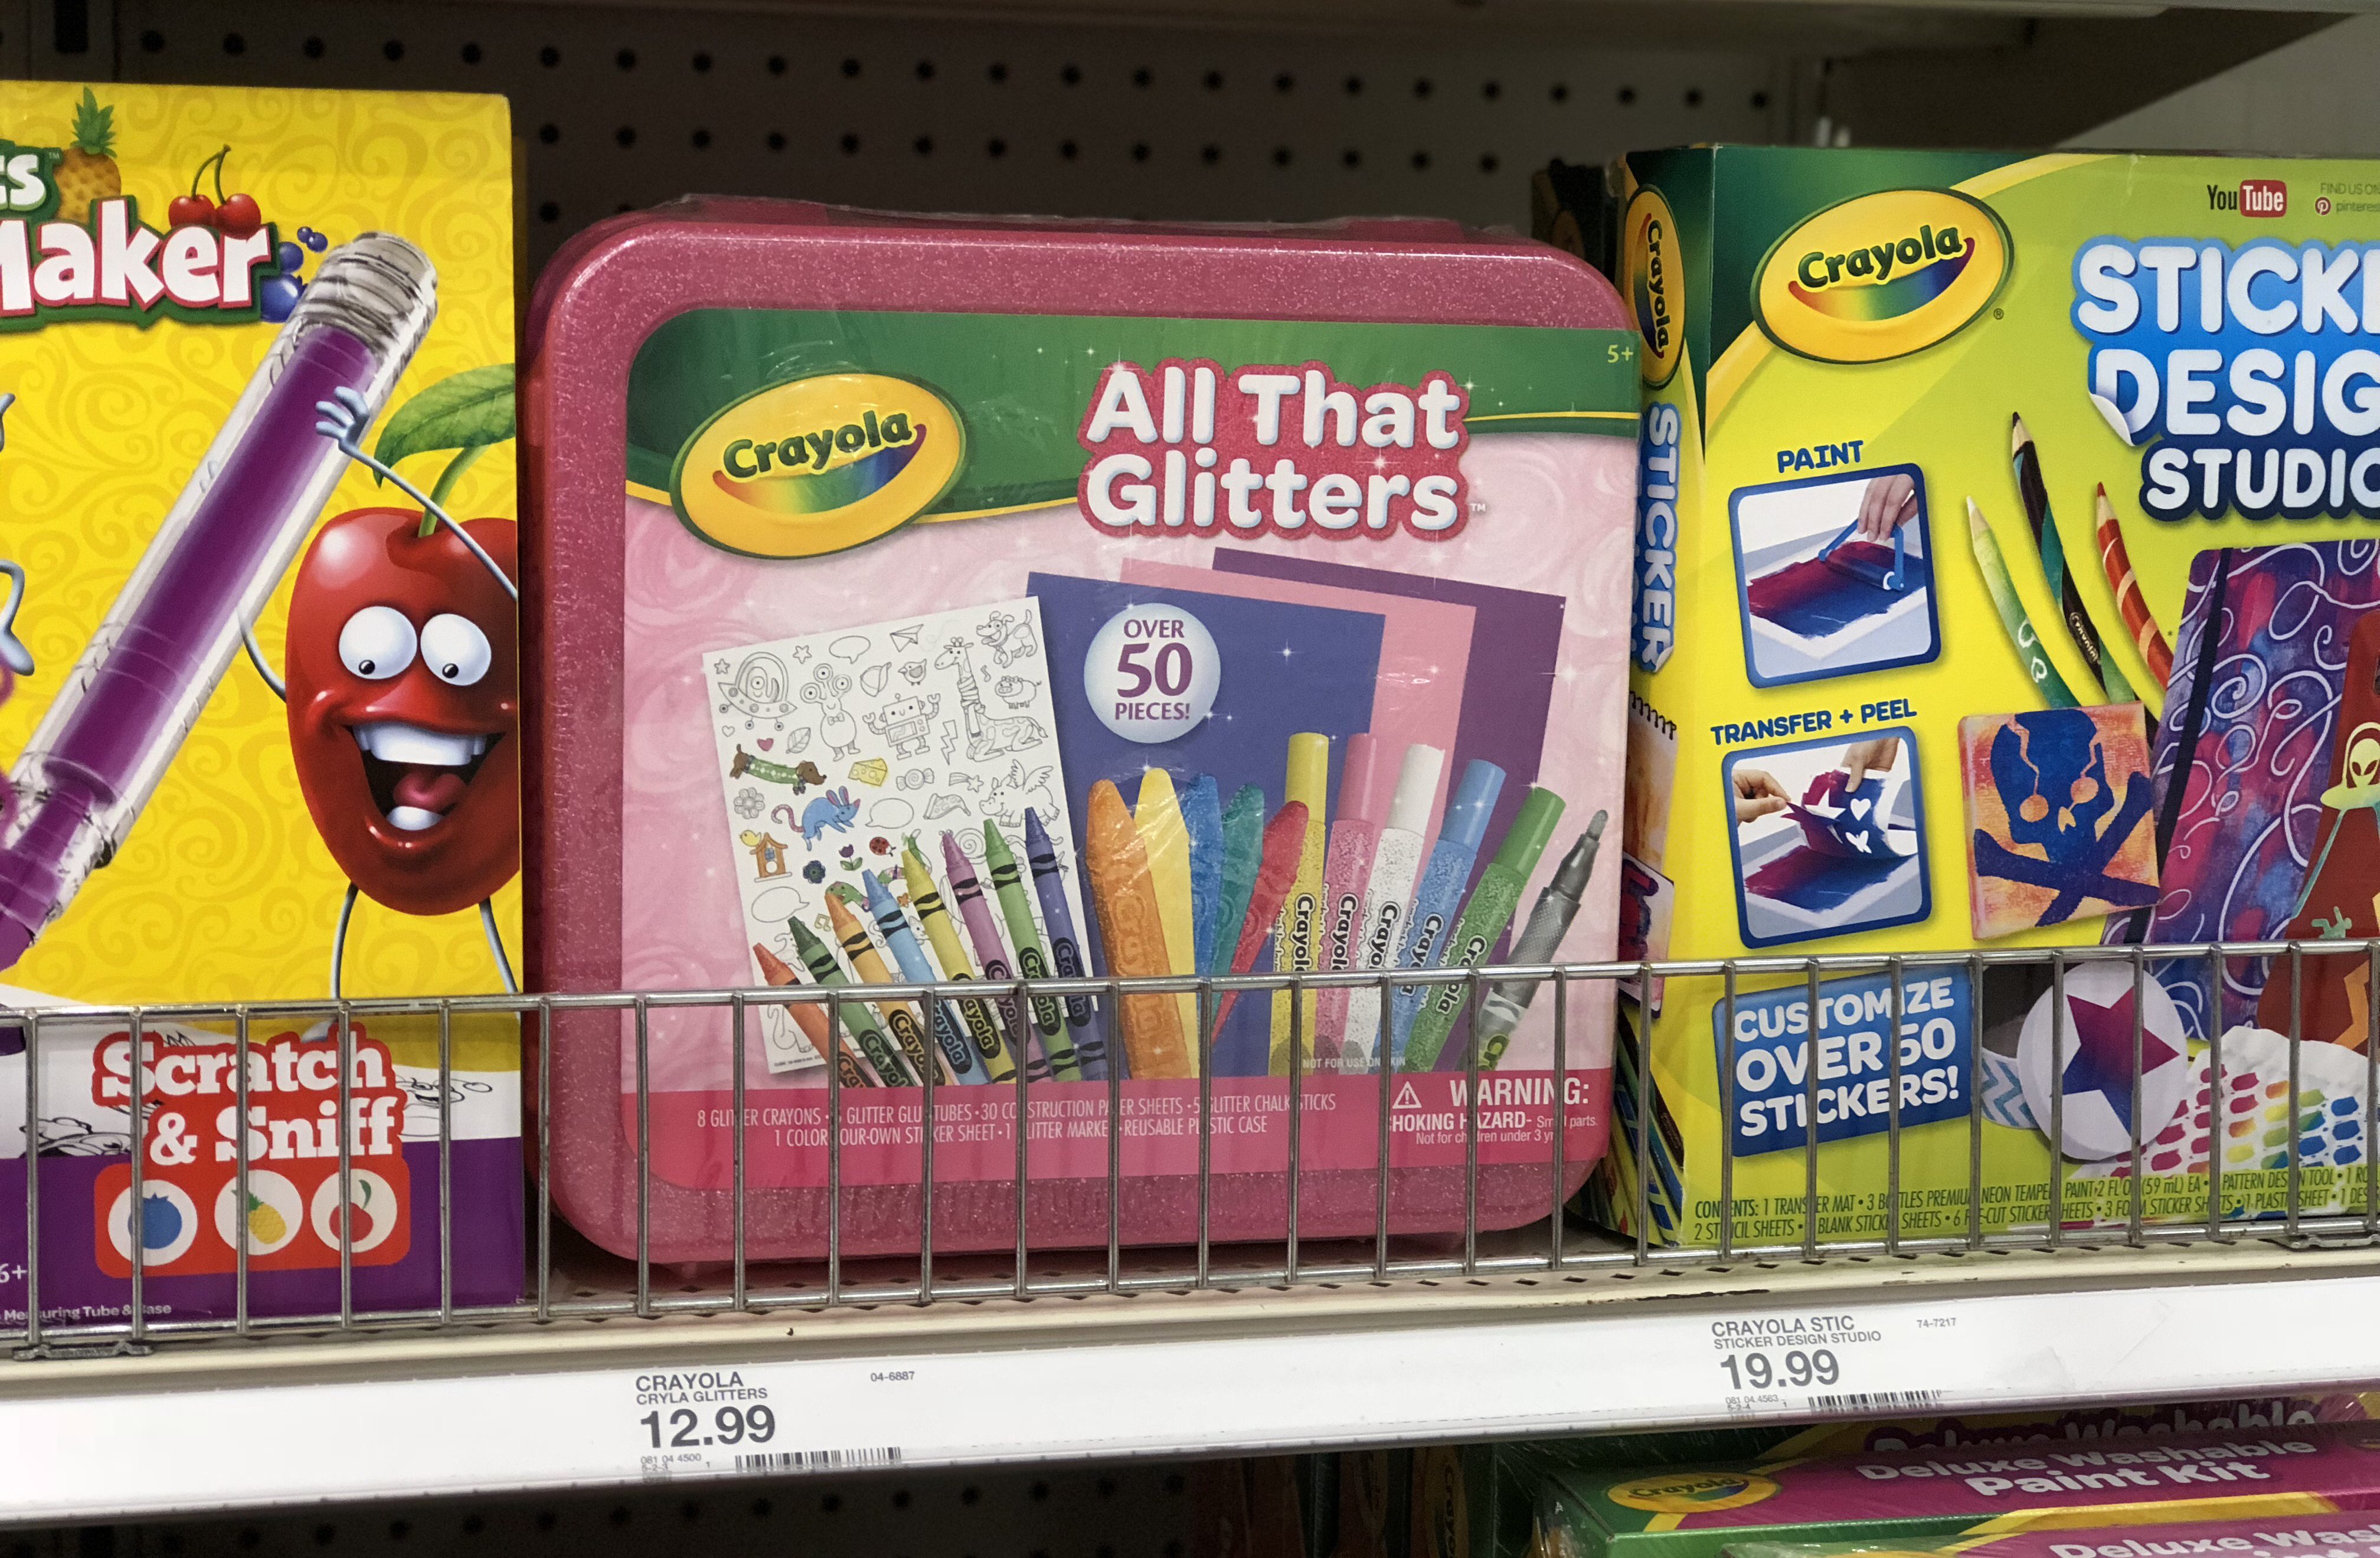 https://hip2save.com/wp-content/uploads/2018/05/crayola-all-that-glitters-at-target-e1527445521521.jpg?resize=4032%2C2640&strip=all